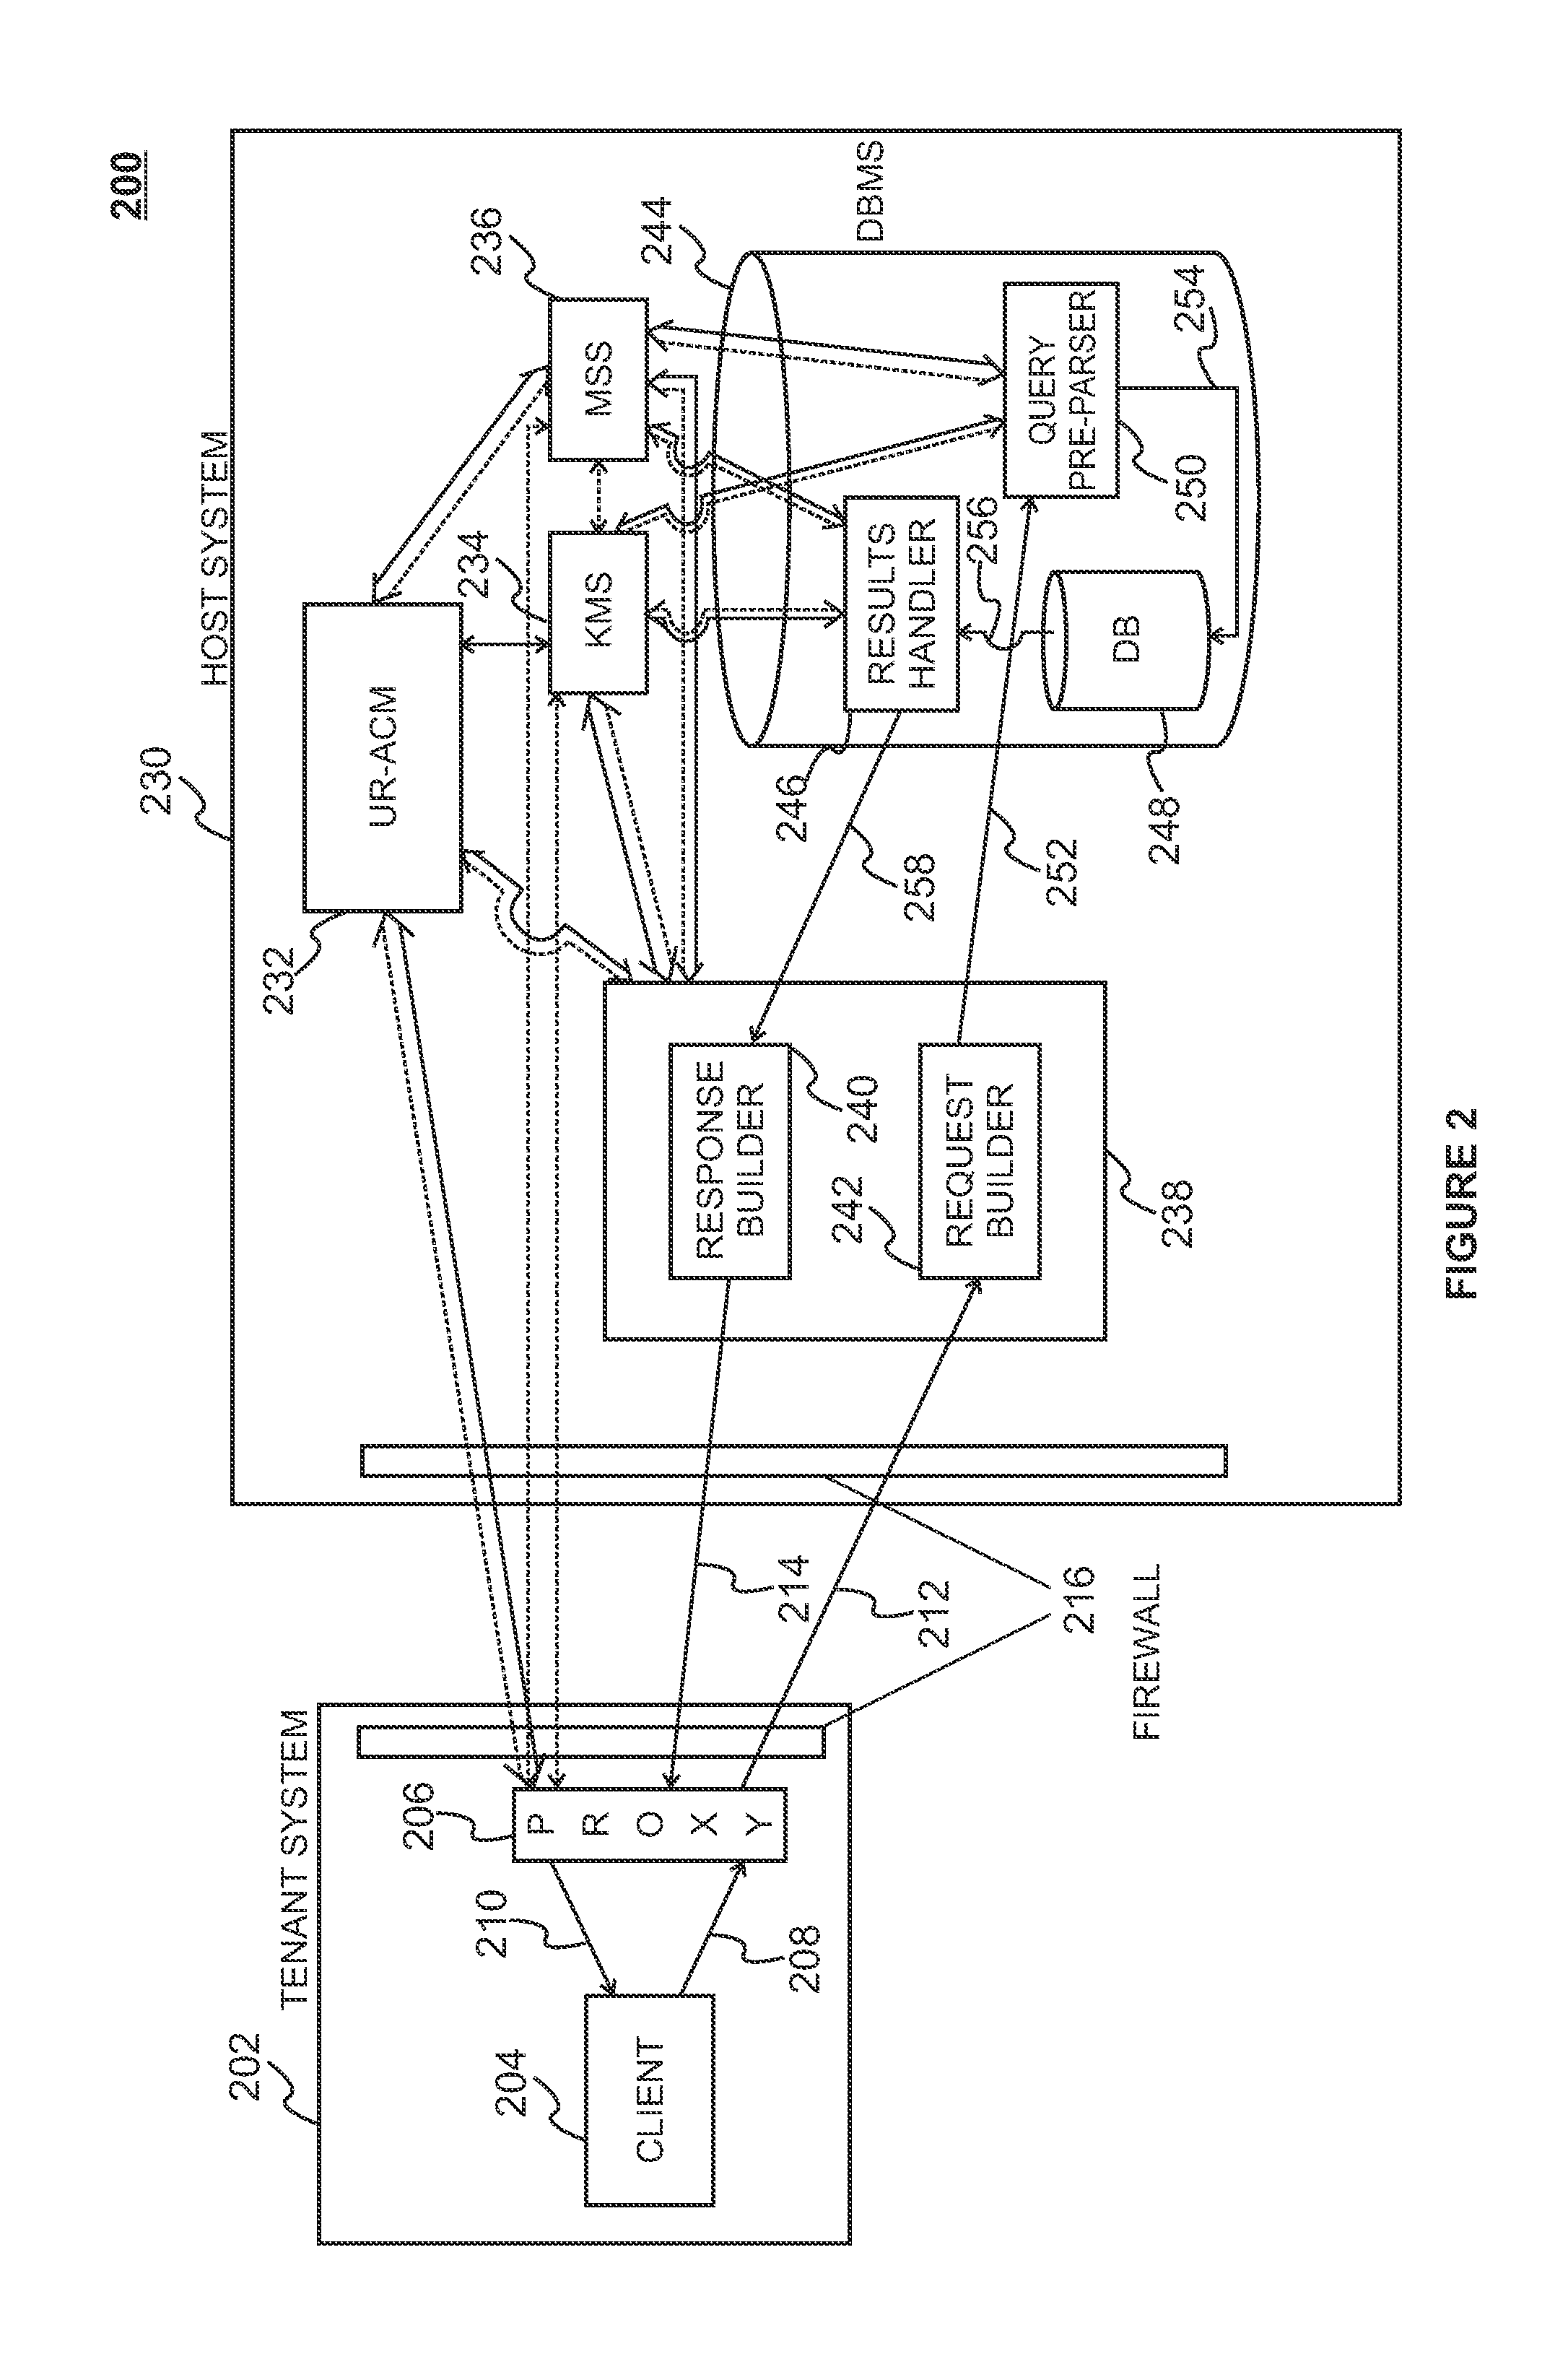 System and method for providing data security in a hosted service system